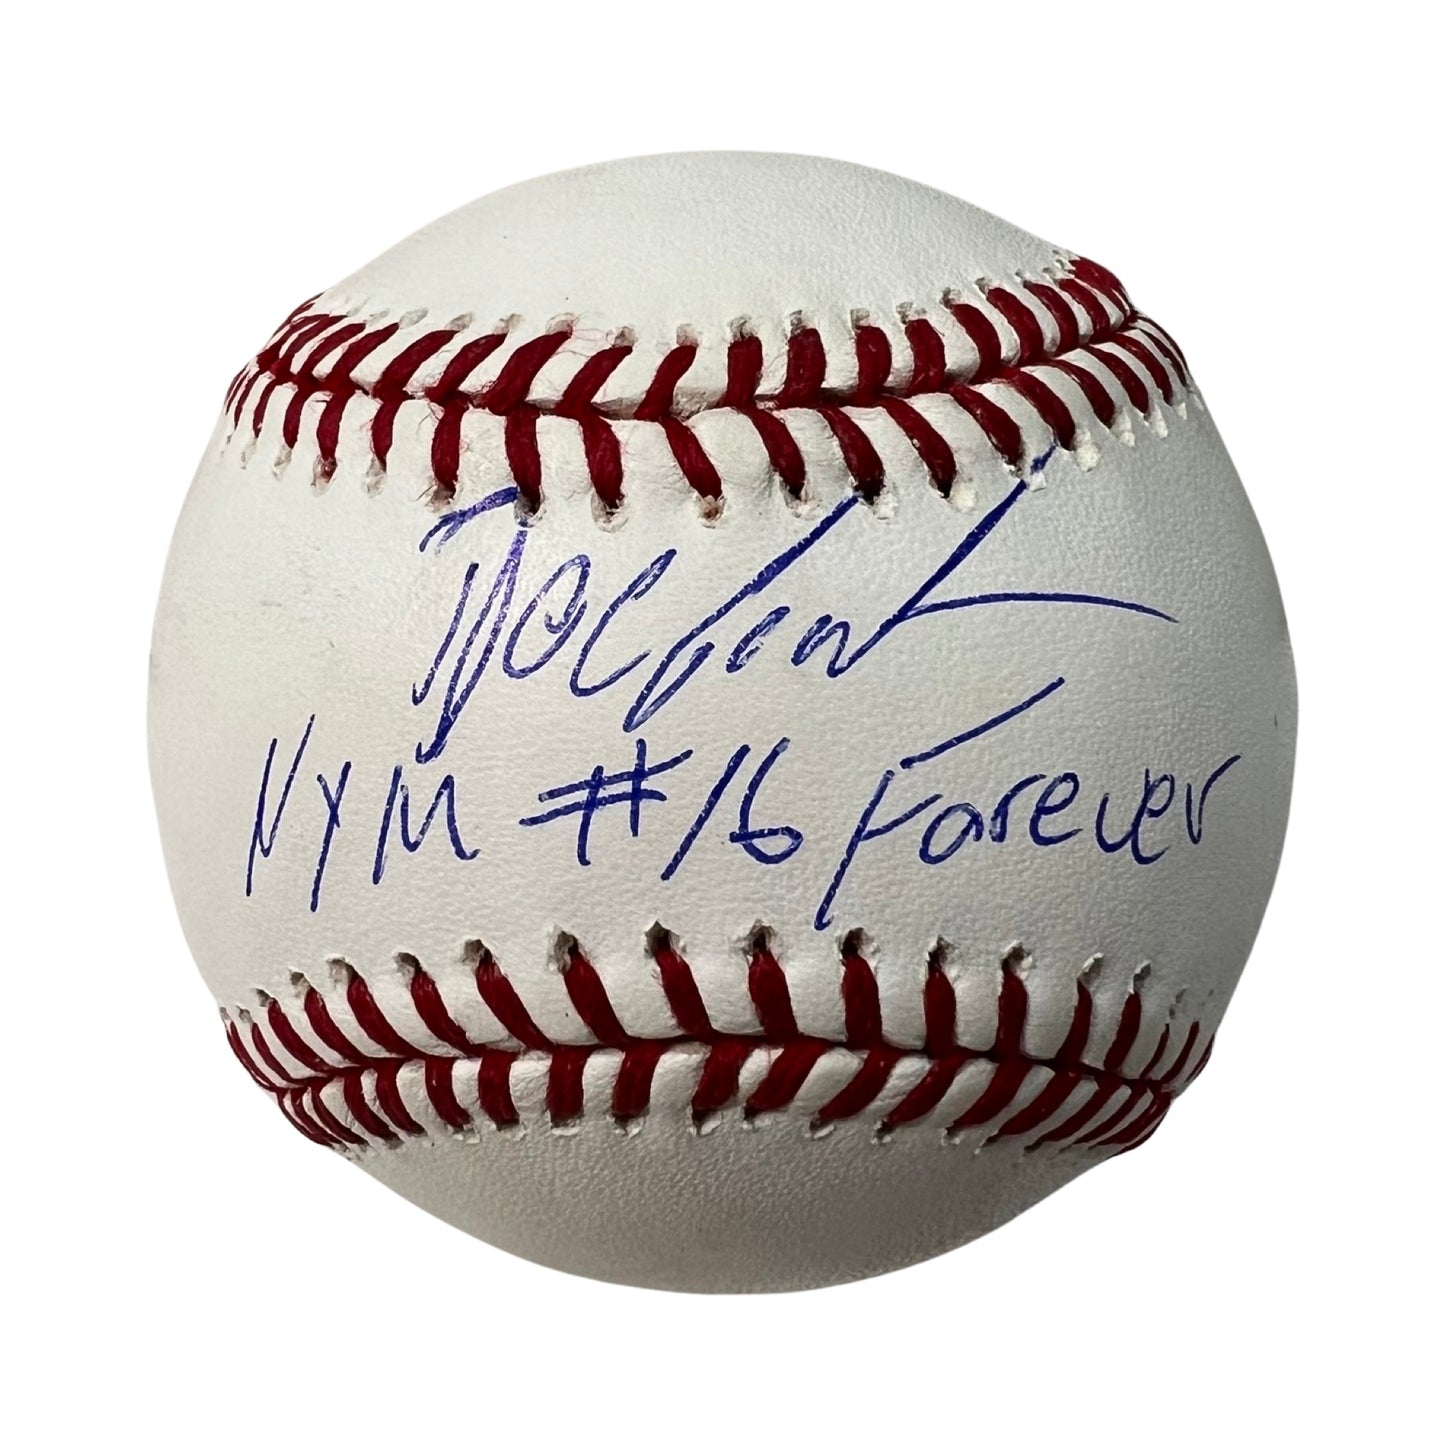 Doc Gooden Autographed New York Mets OMLB “NYM #16 Forever” Inscription Steiner CX